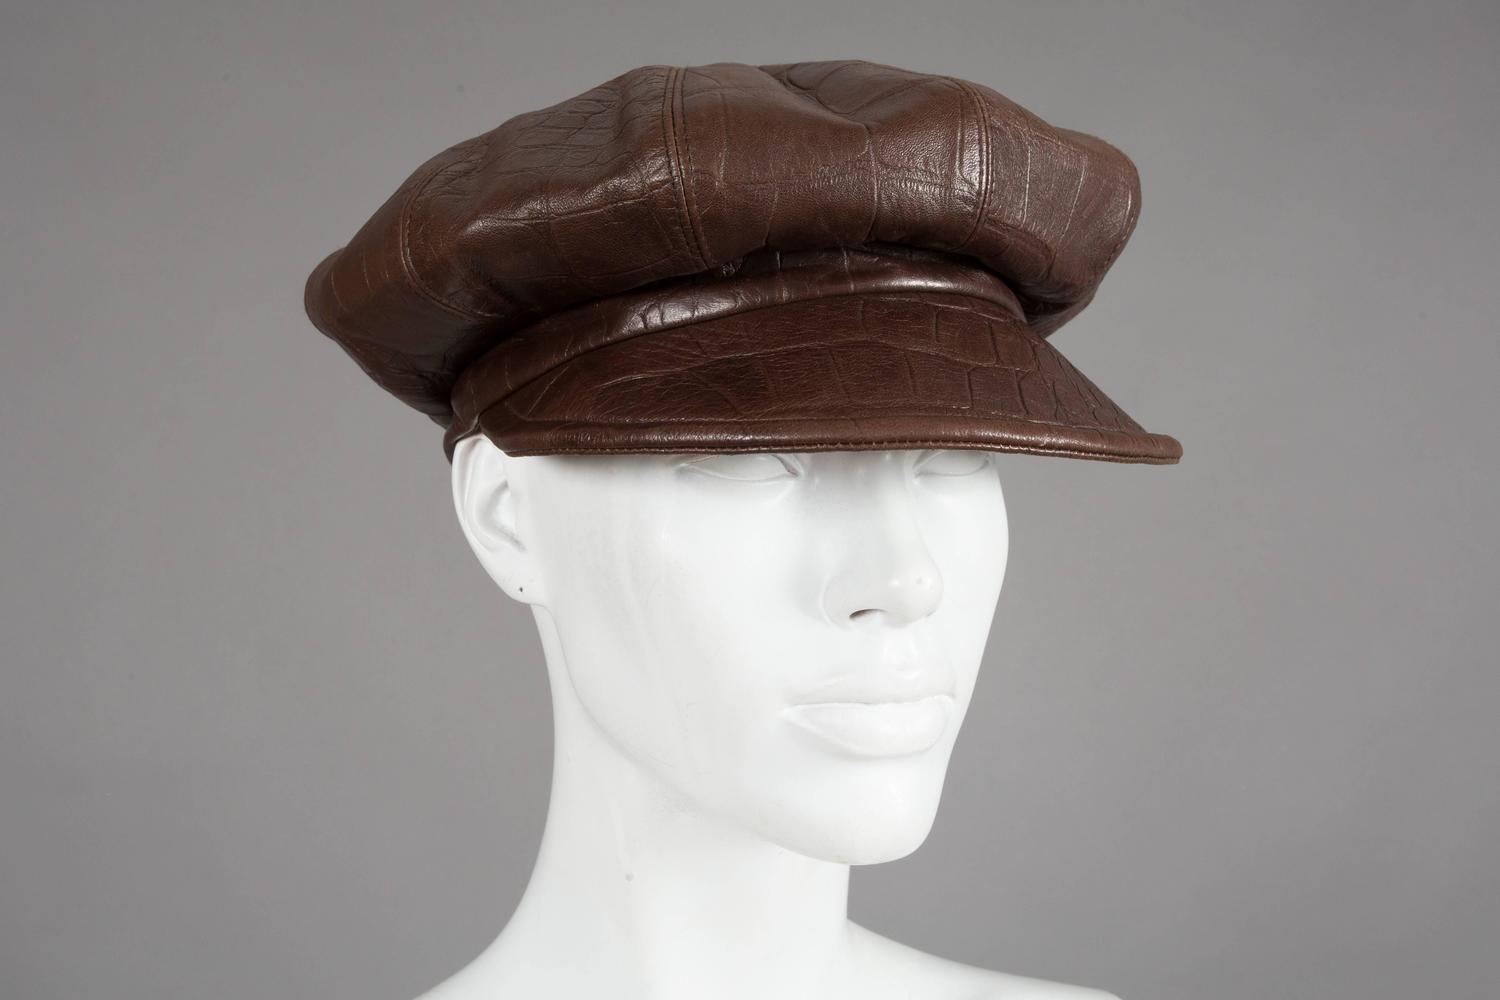 Christian Dior by John Galliano brown leather newsboy cap, C. 2005 at